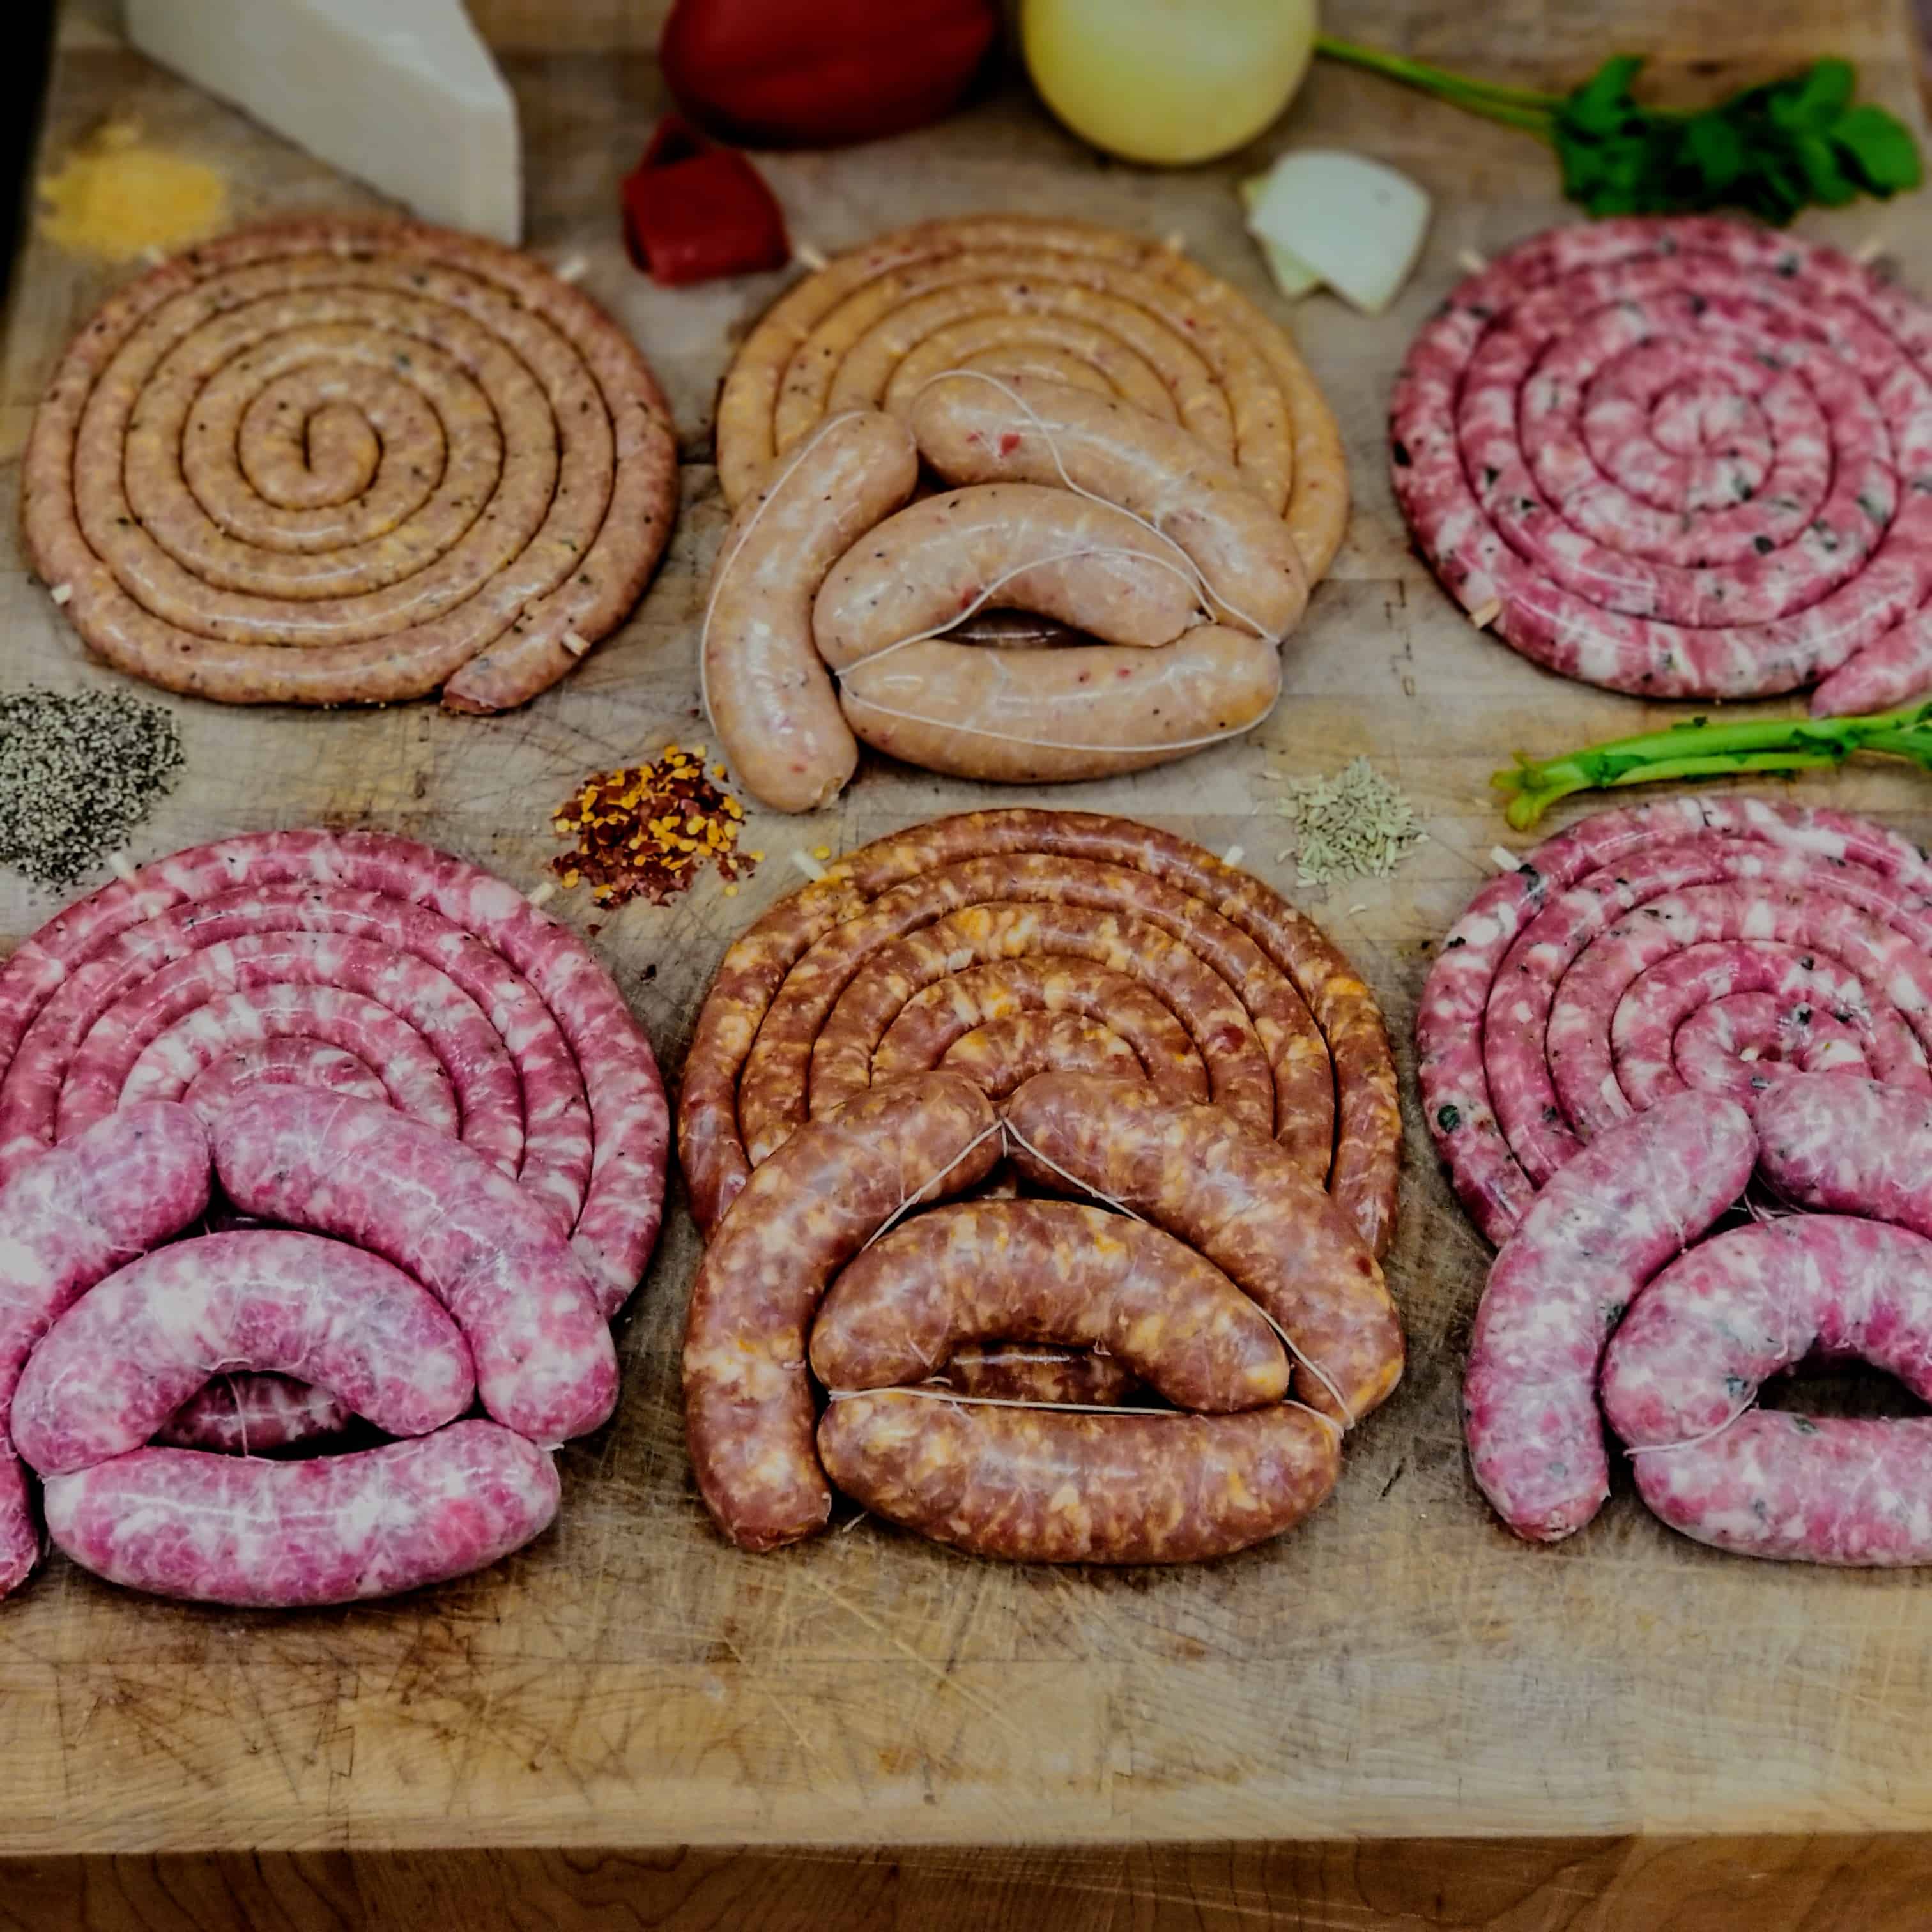 variety of butcher sausage links and sauage rolls